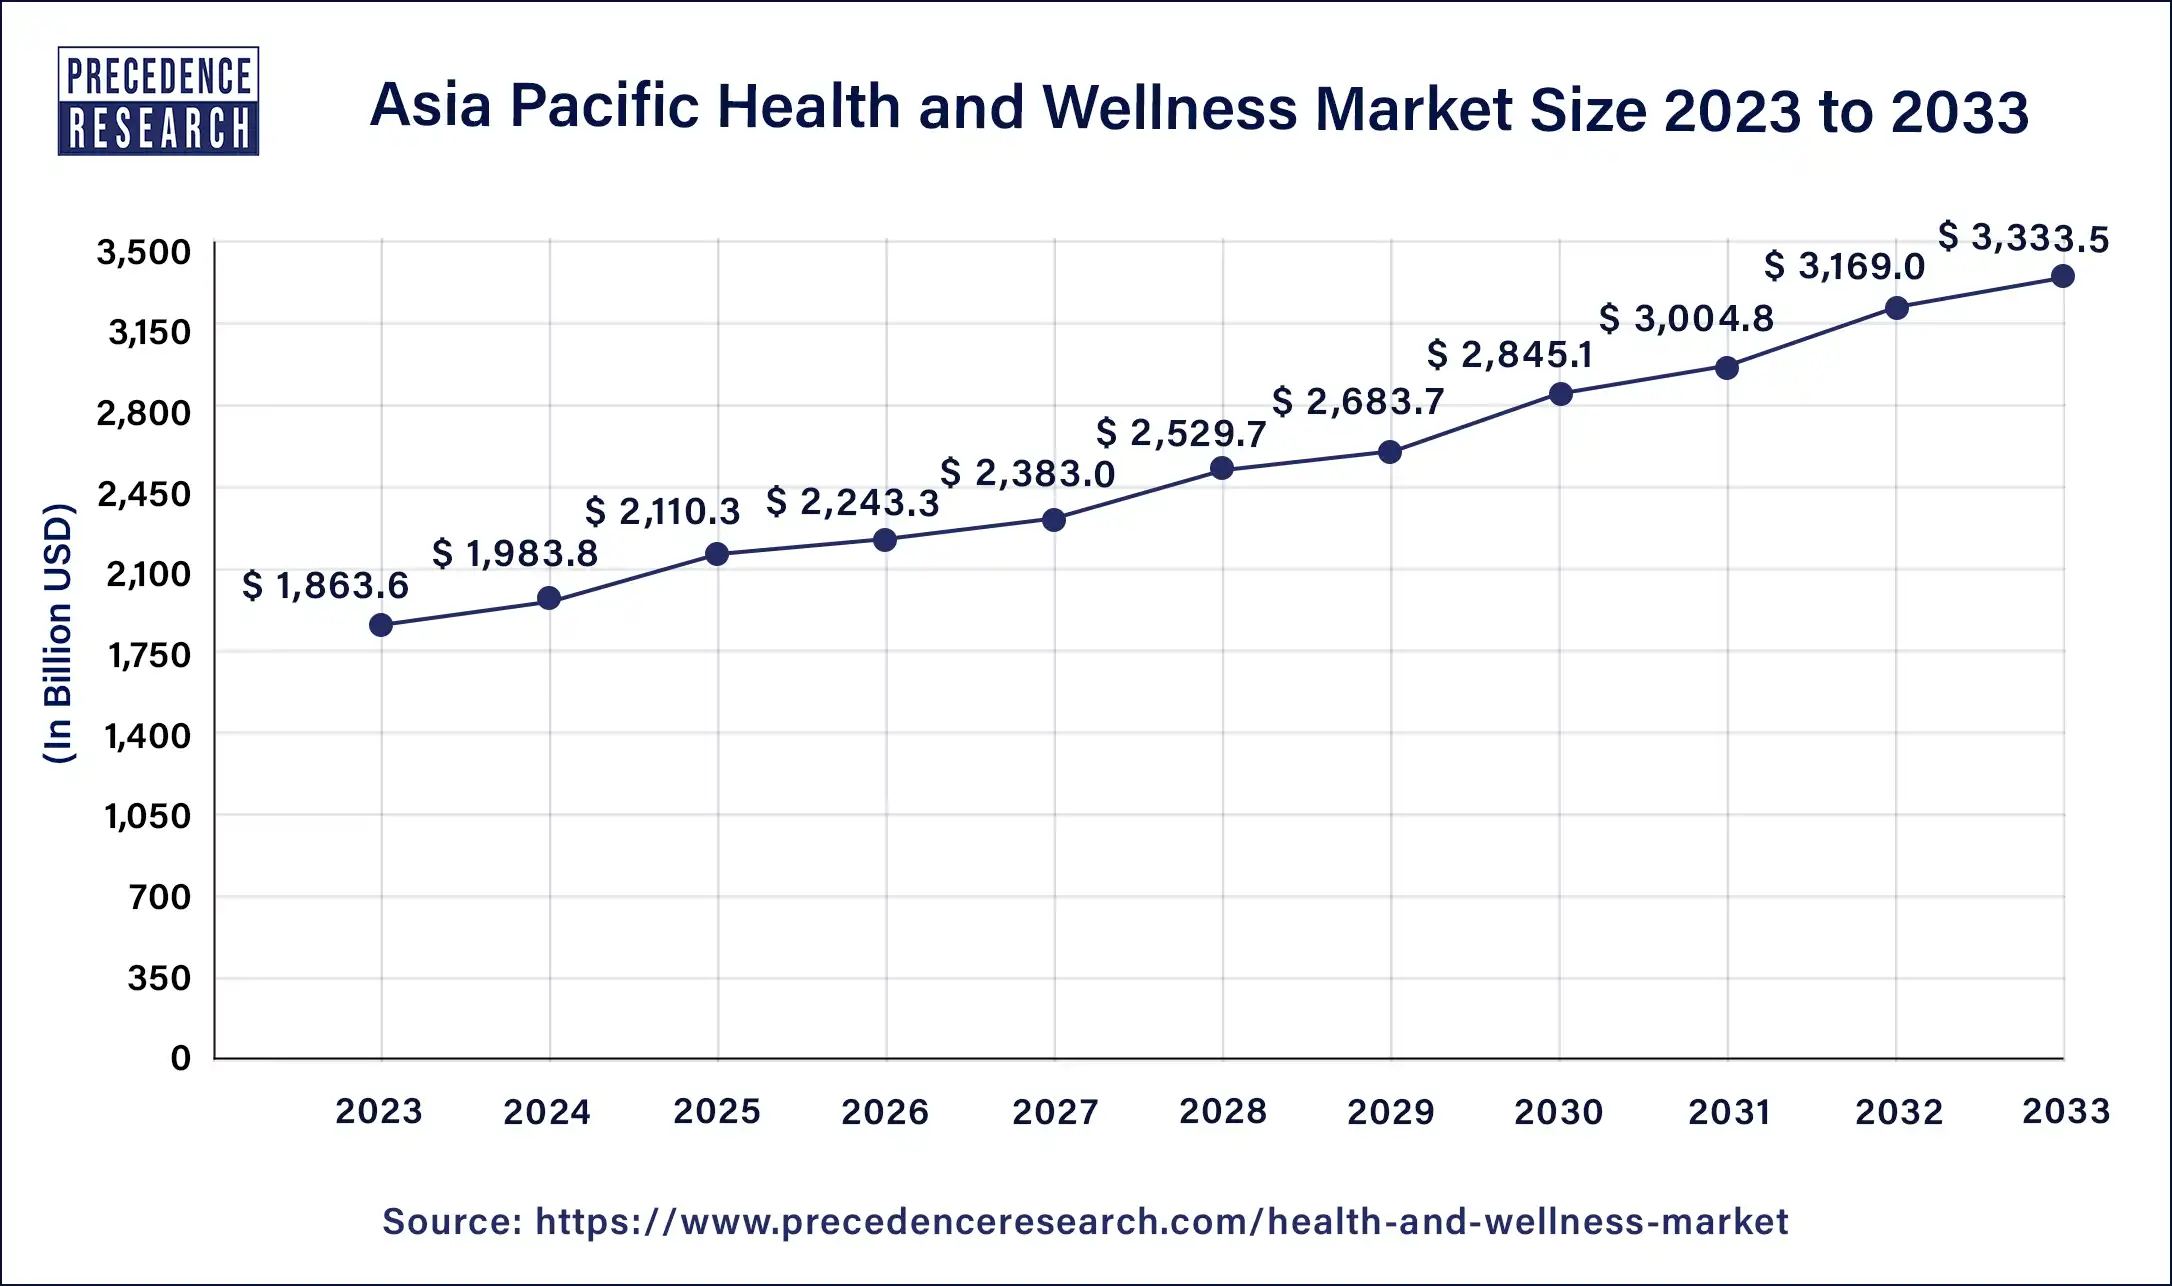 Asia Pacific Health and Wellness Market Size 2024 to 2033